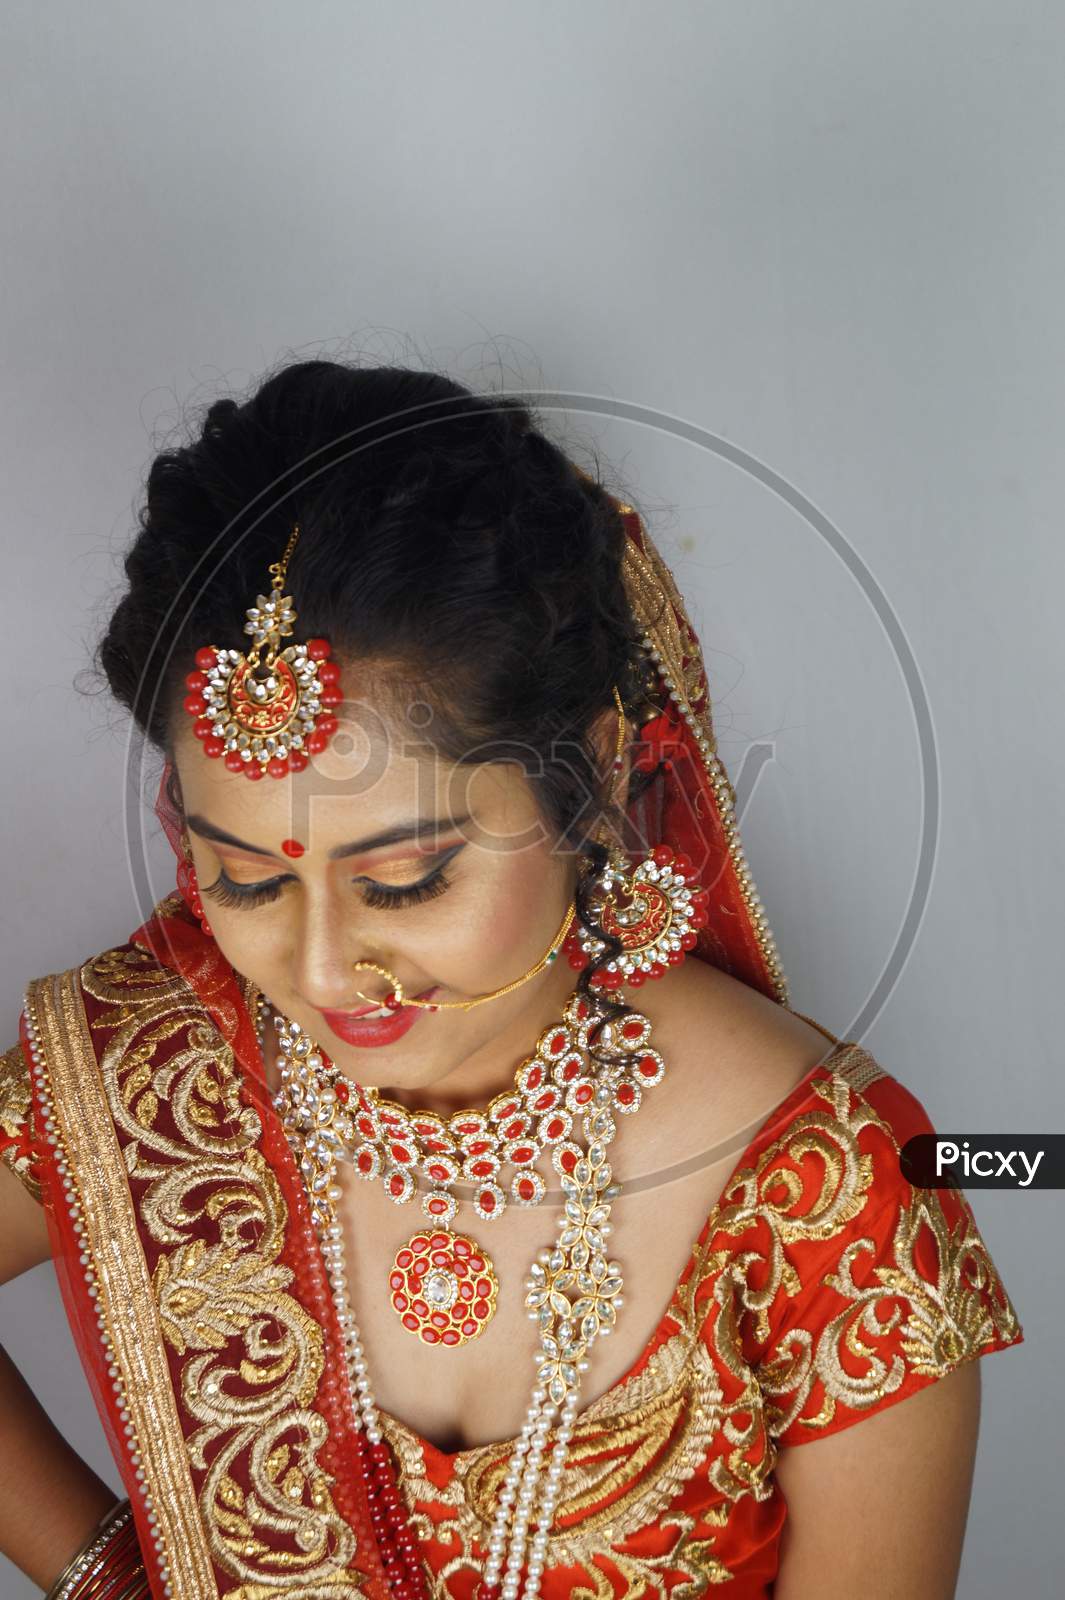 Expert Tips on How to Perfect the Tamil Bridal Makeup Quick and Easy